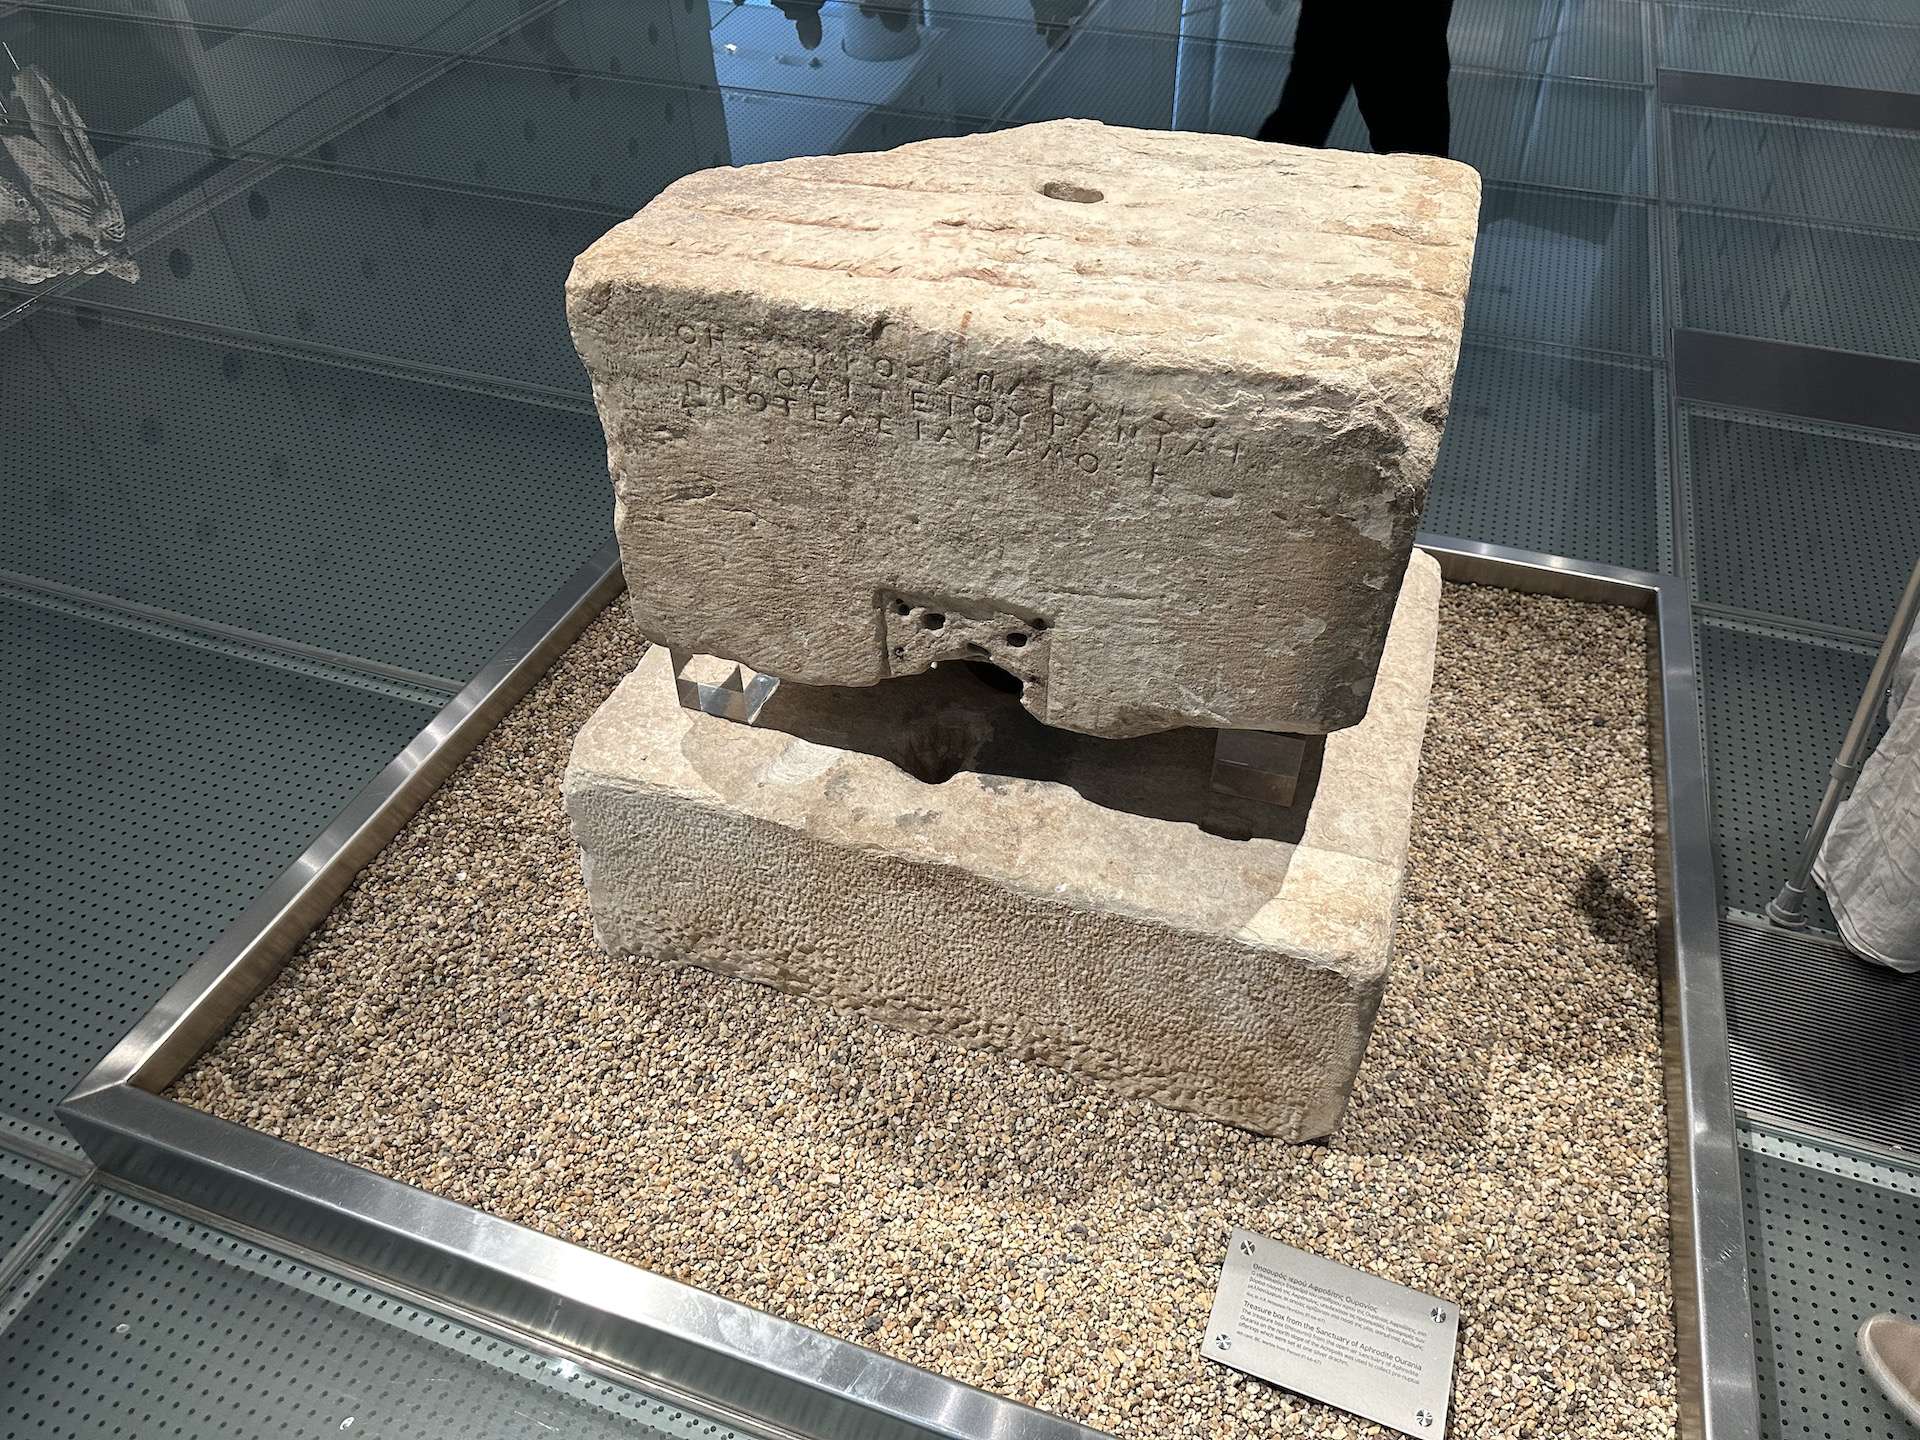 Treasure box from the Sanctuary of Aphrodite Ourania; 4th century BC at the Acropolis Museum in Athens, Greece